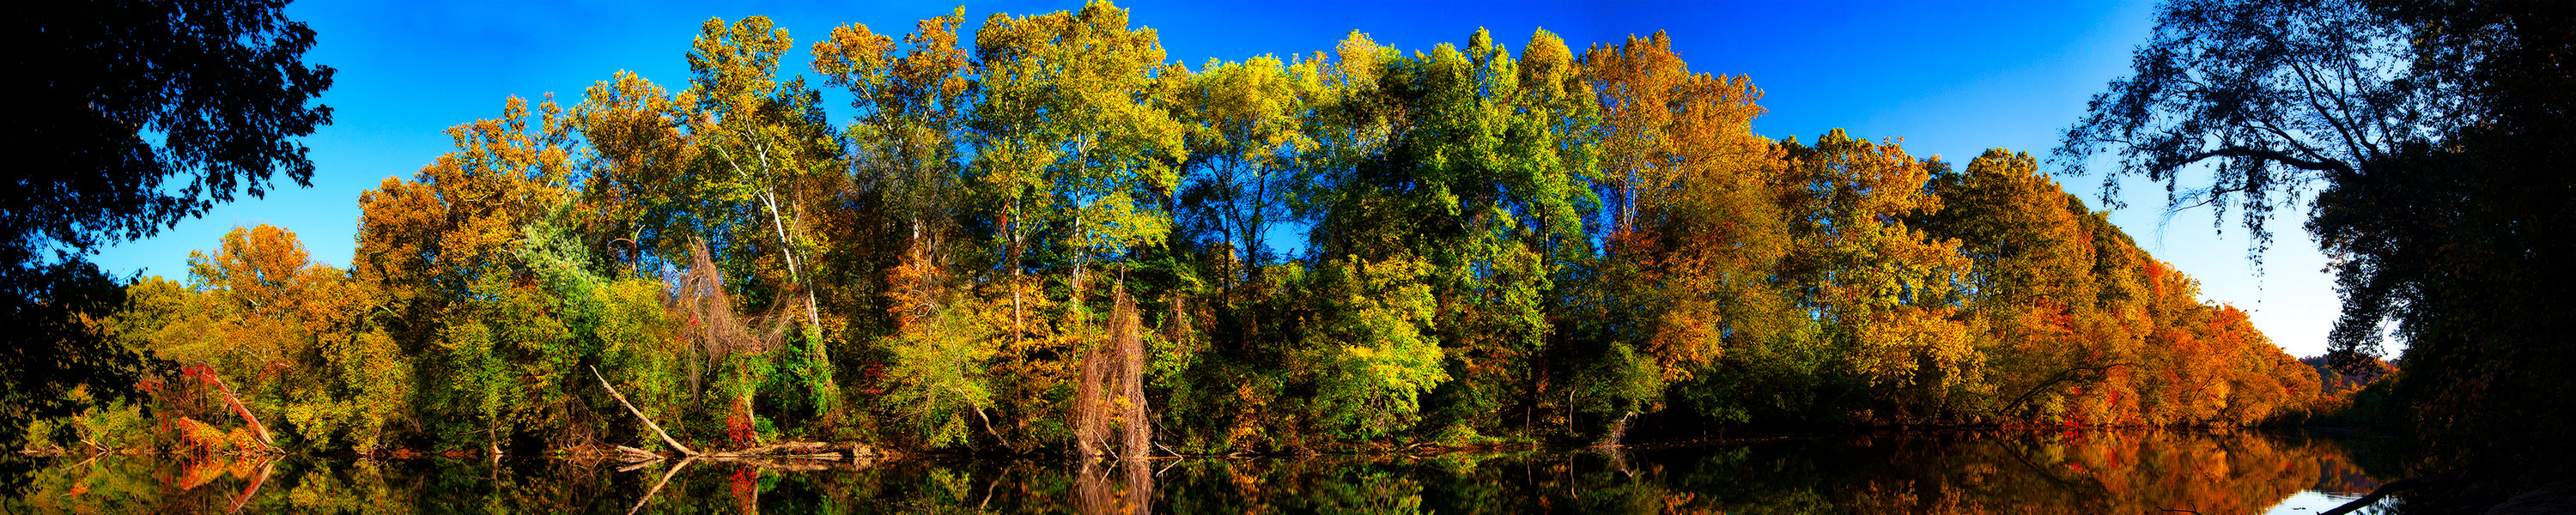 Coal River Lincoln County WV - Panorama Photography By Sean Rose